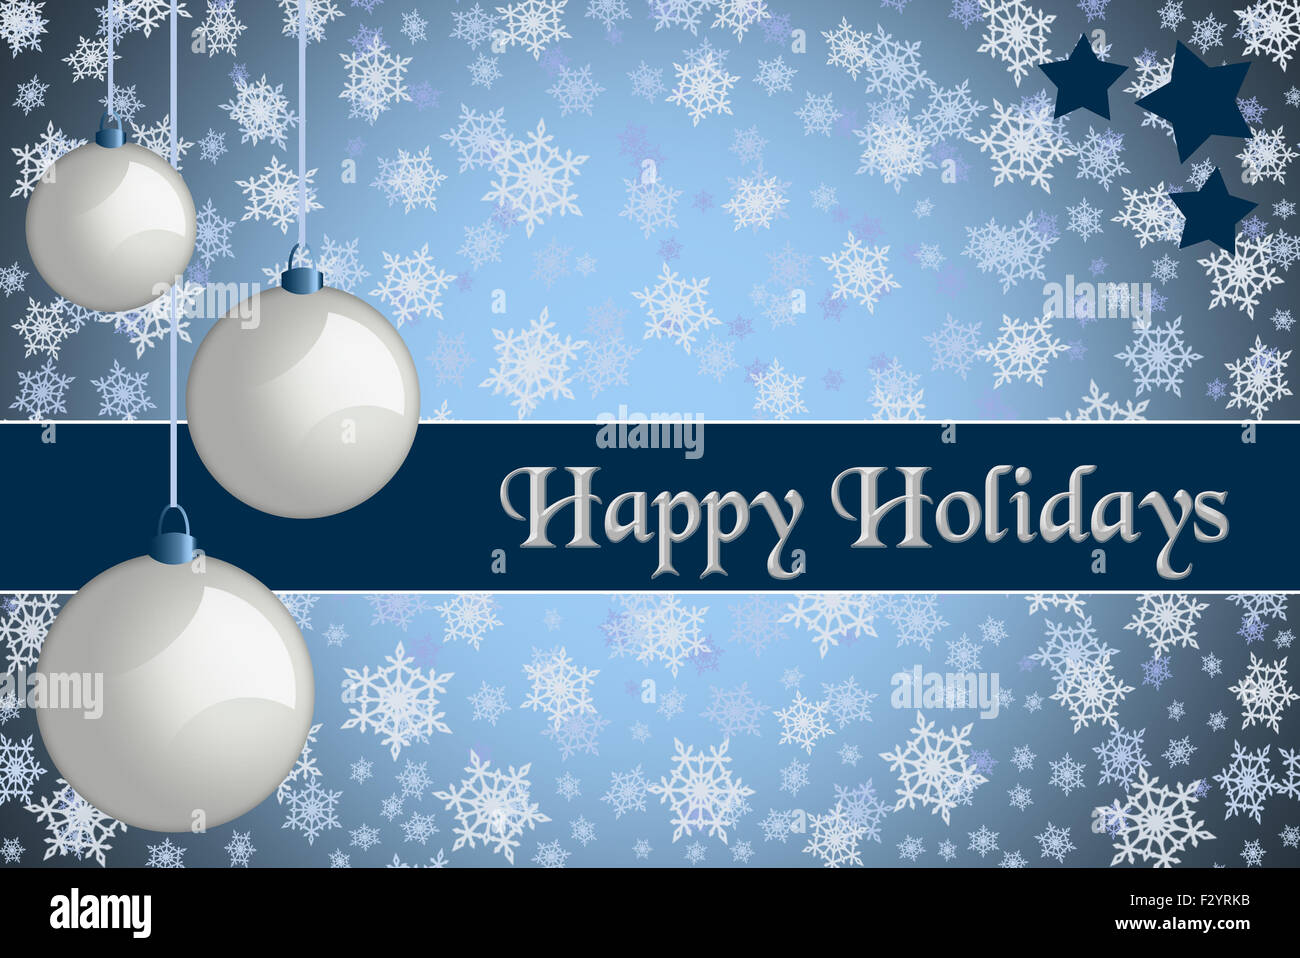 Christmas greeting card. 'Happy Holidays' Blue colored Christmas card with retro white baubles and snowflake background. Stock Photo